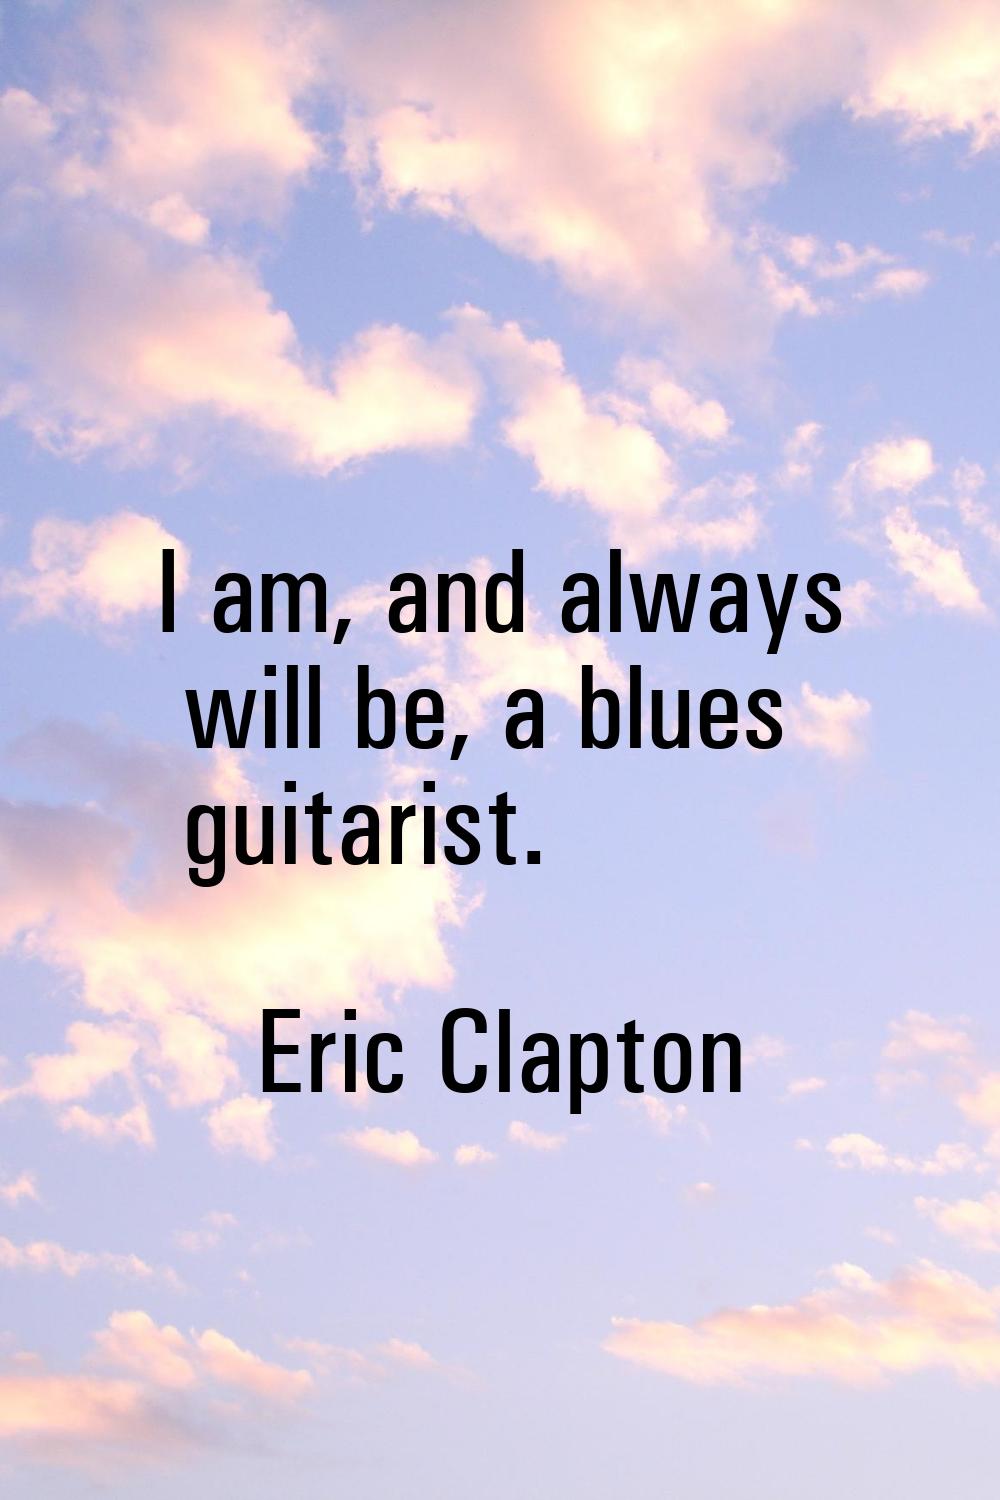 I am, and always will be, a blues guitarist.